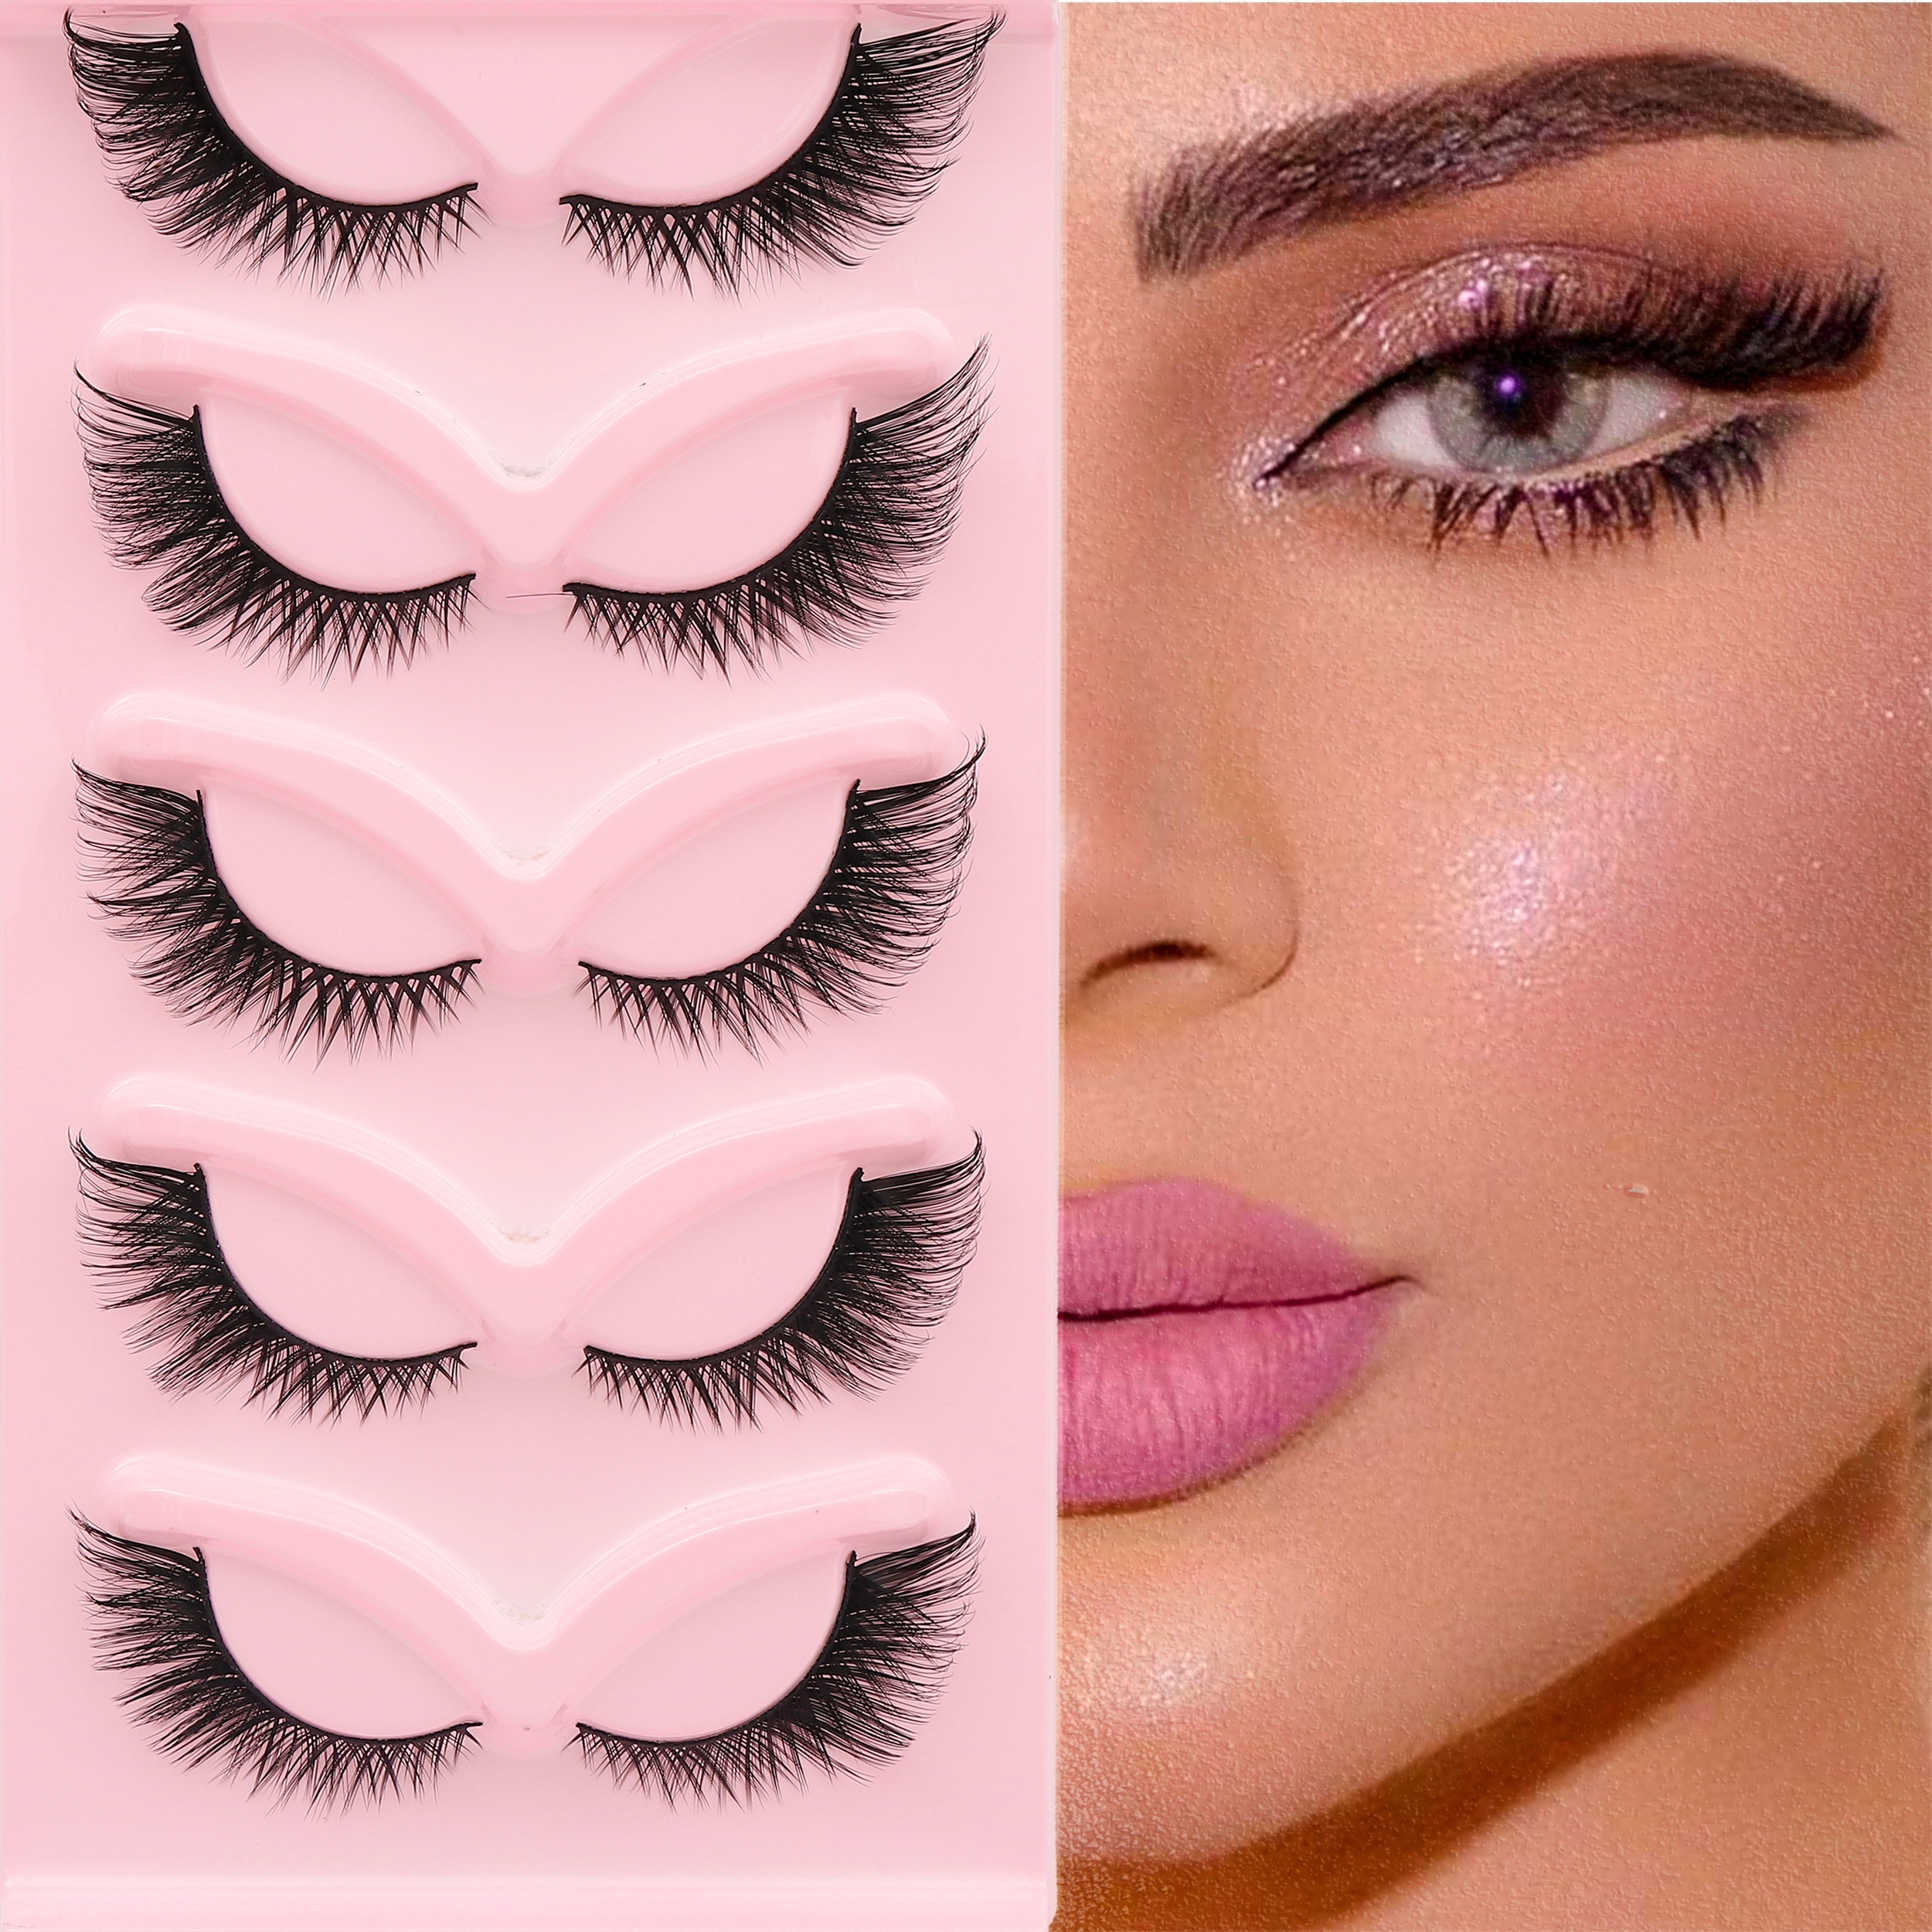 

3d Faux Mink False Eyelashes 5 Pairs Set - Multi-length (6-15mm) Cat Eye & Natural Styles With C , 0.05mm Thickness - Self-adhesive, Easy For Beginners & Reusable - Enhance Your Eyes With Thick Lashes